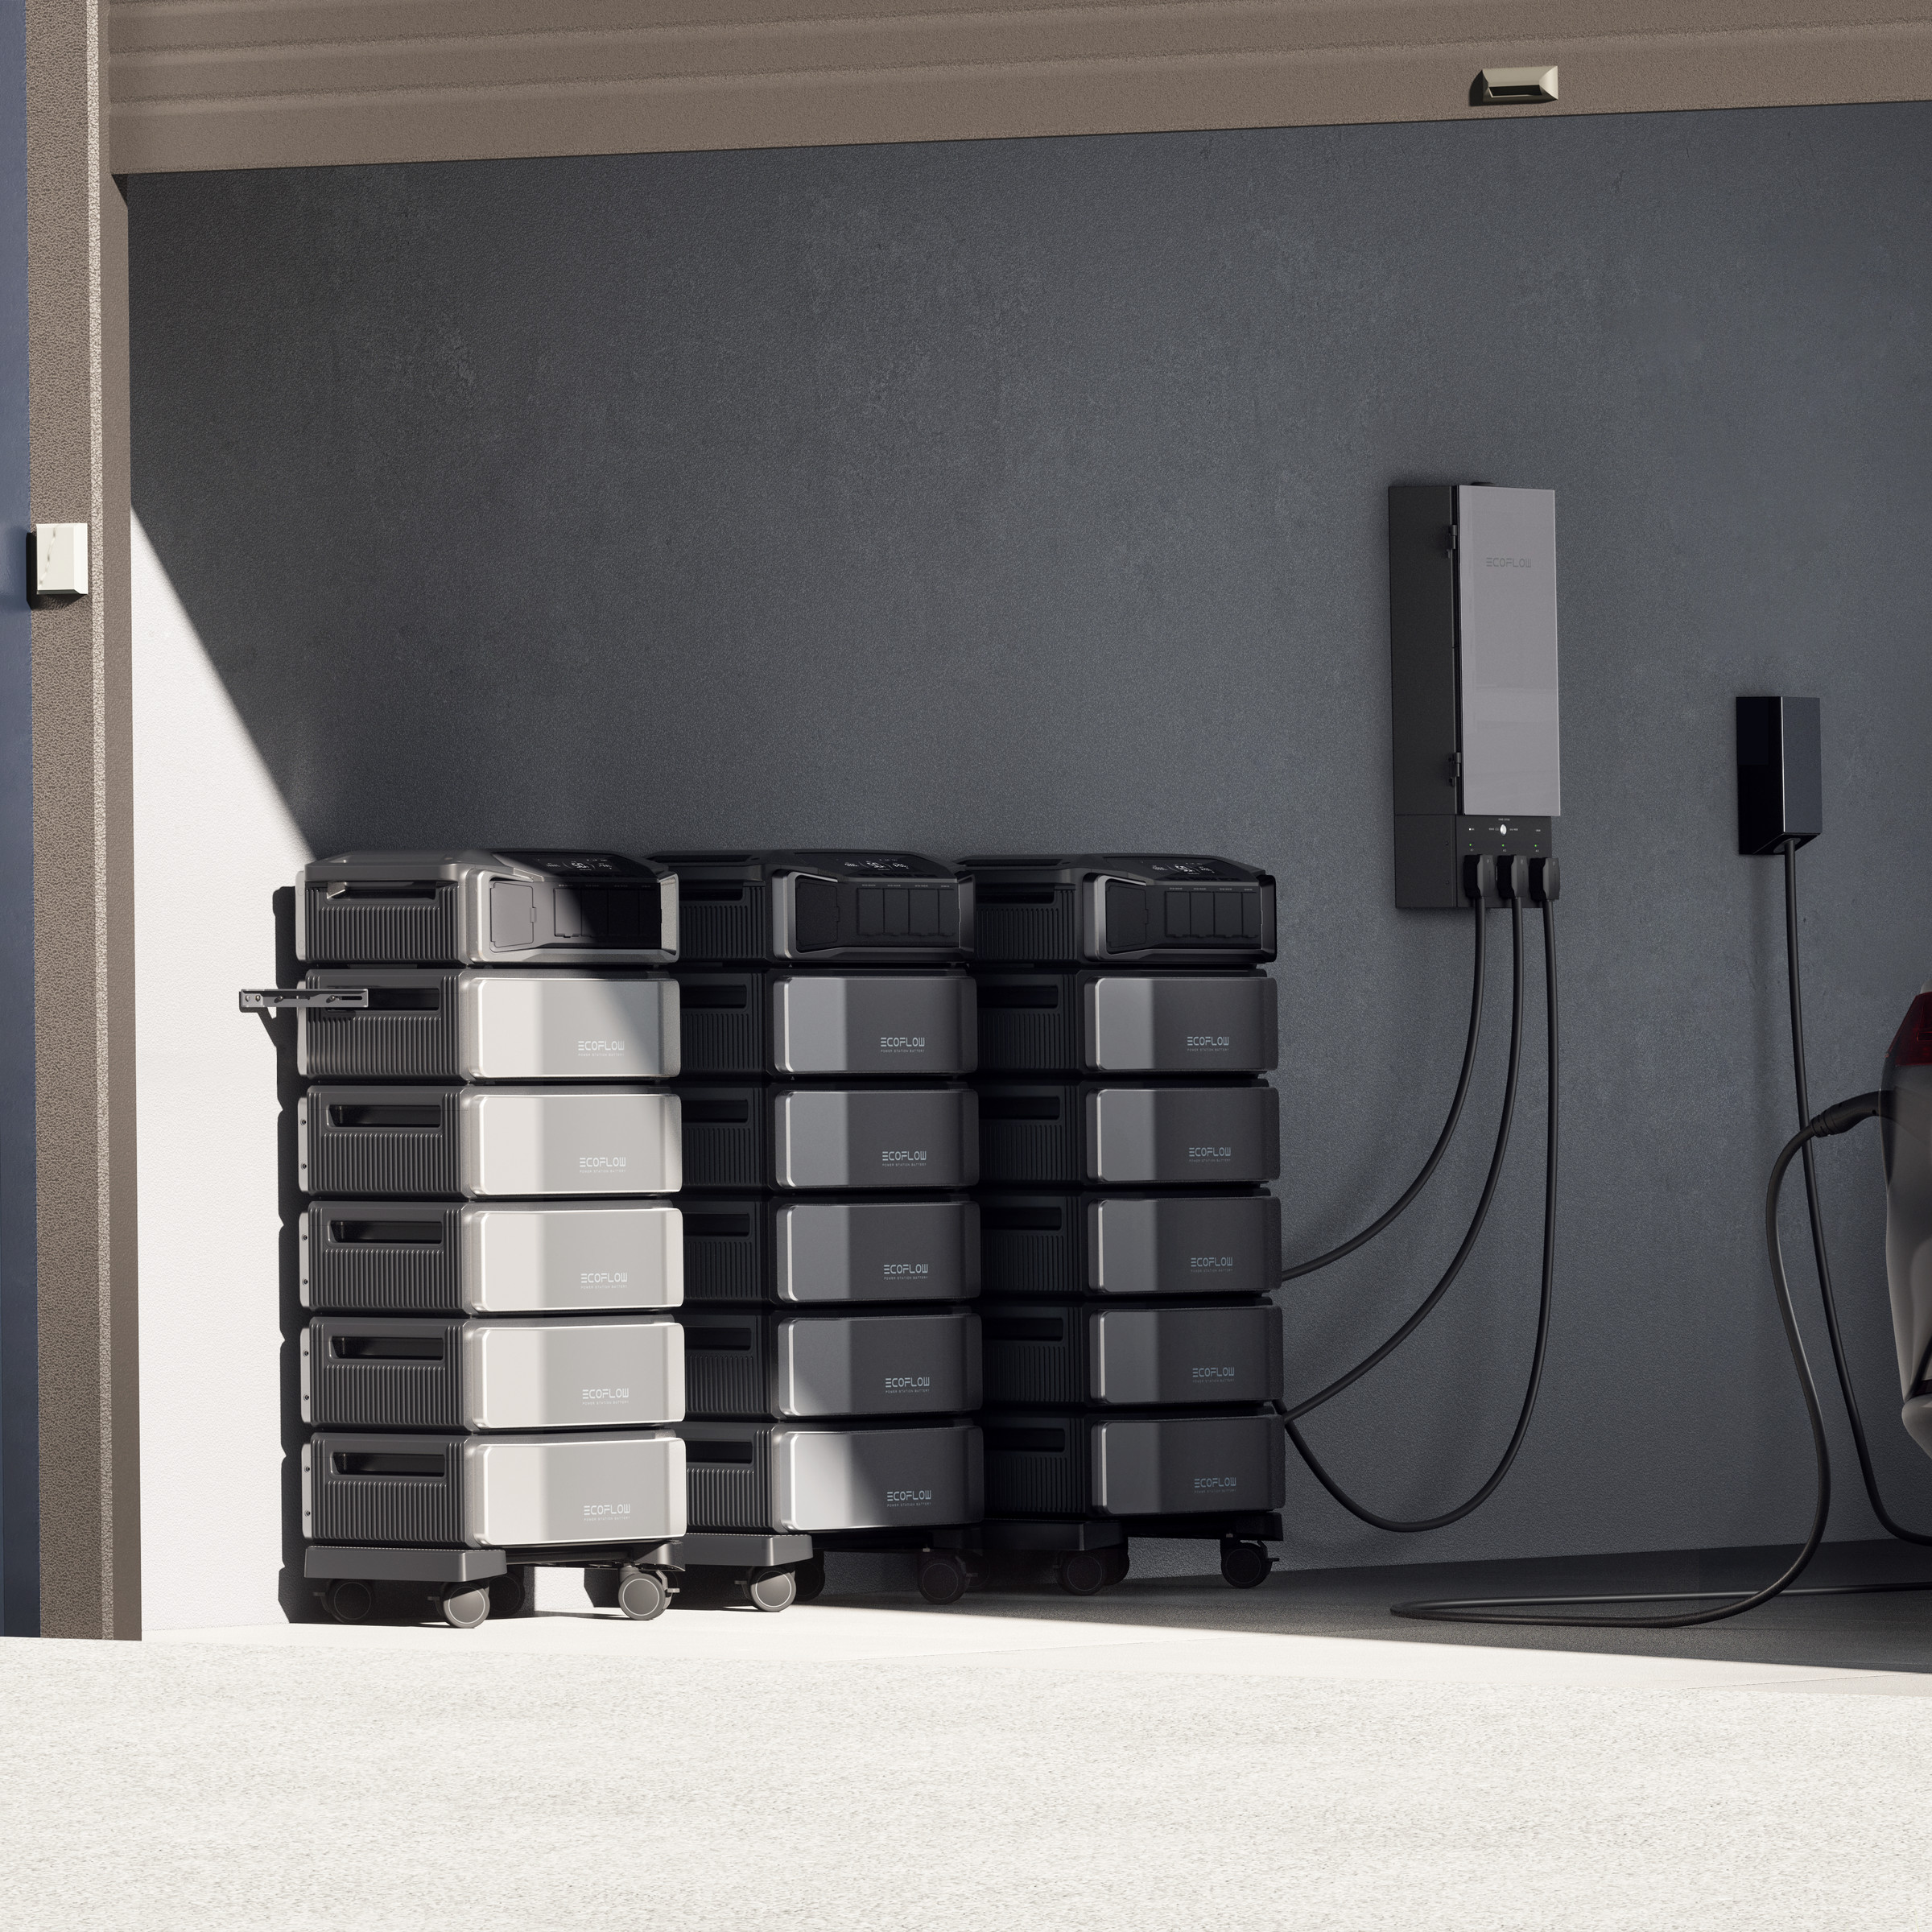 A photo of a garage with three inverters and 15 batteries connecting to EcoFlow’s Smart Home Panel 2.